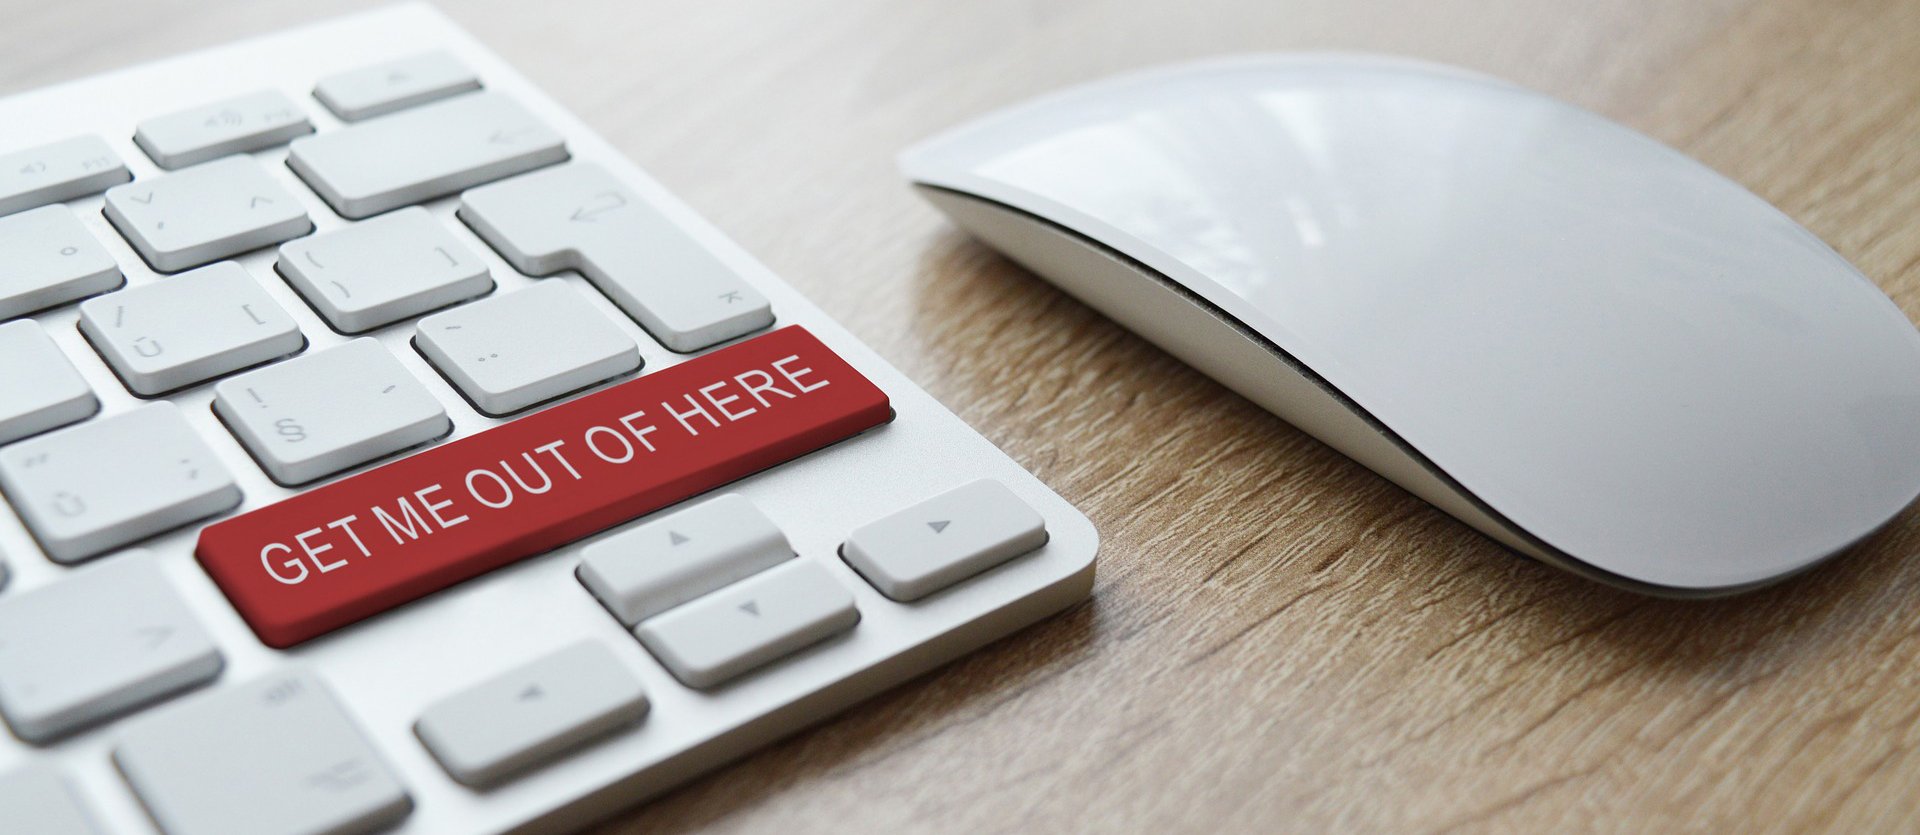 image of a keyboard with a button that says get me out of here